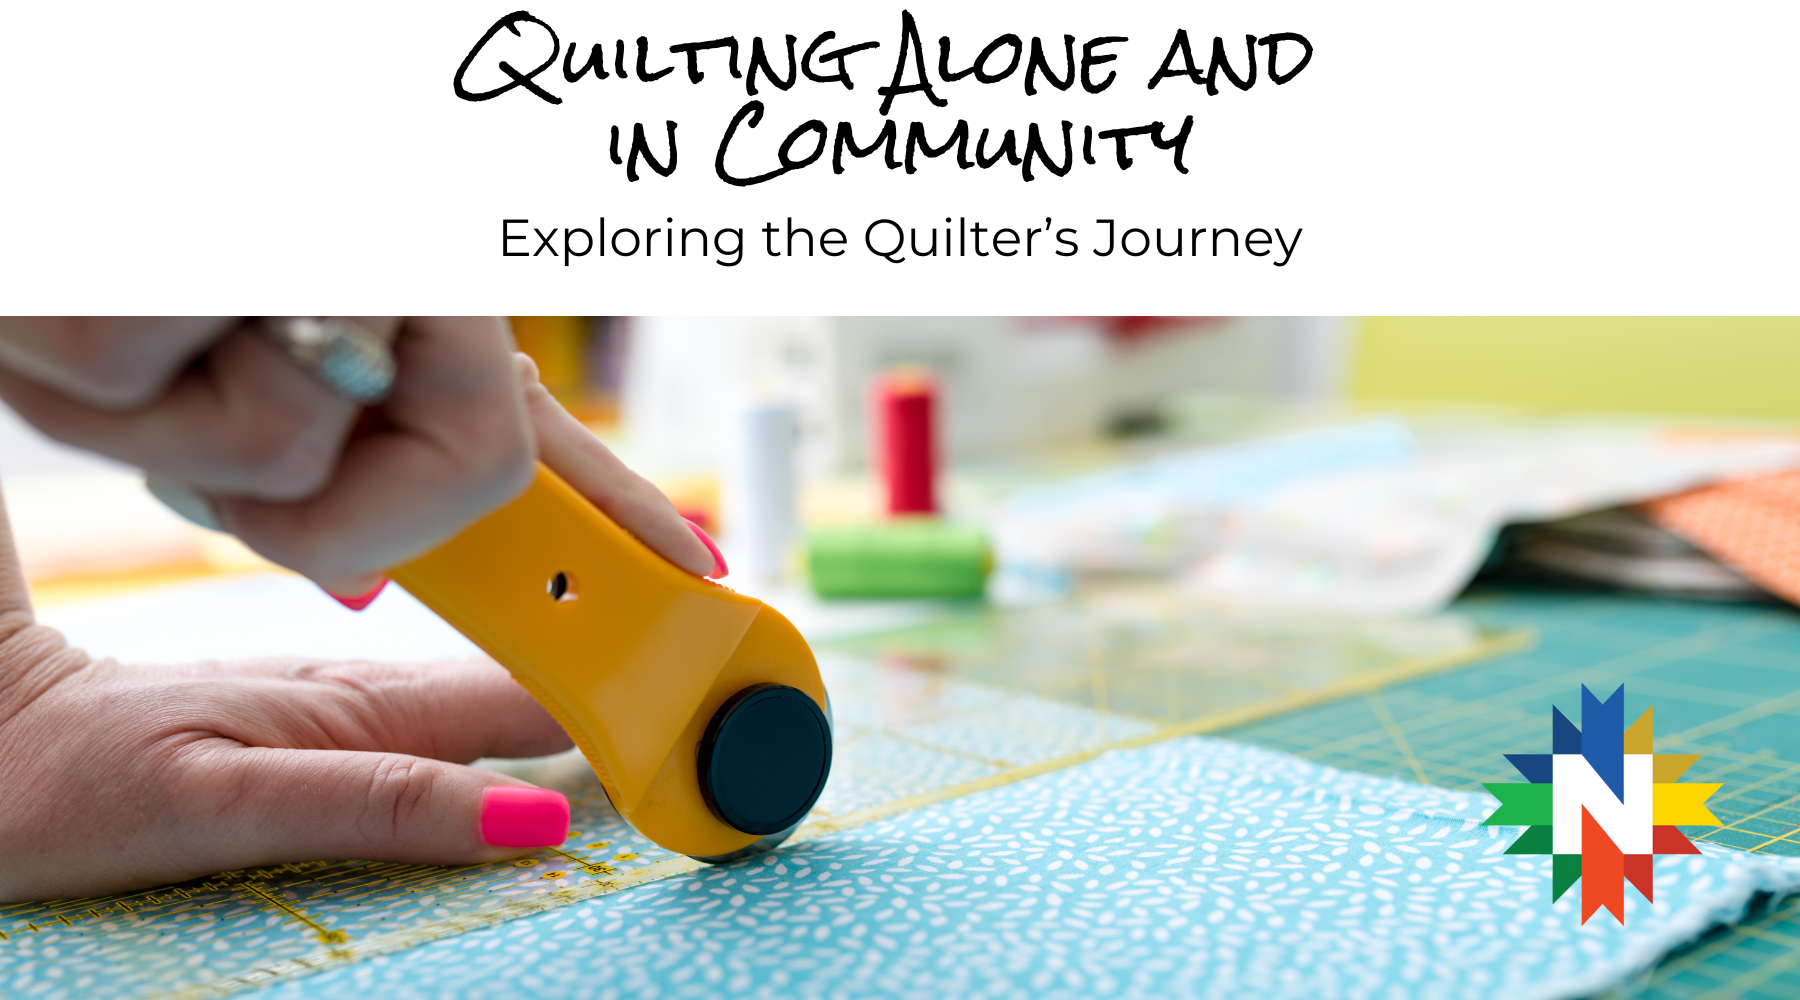 Quilting Alone and Quilting Community: Exploring the Quilter's Journey